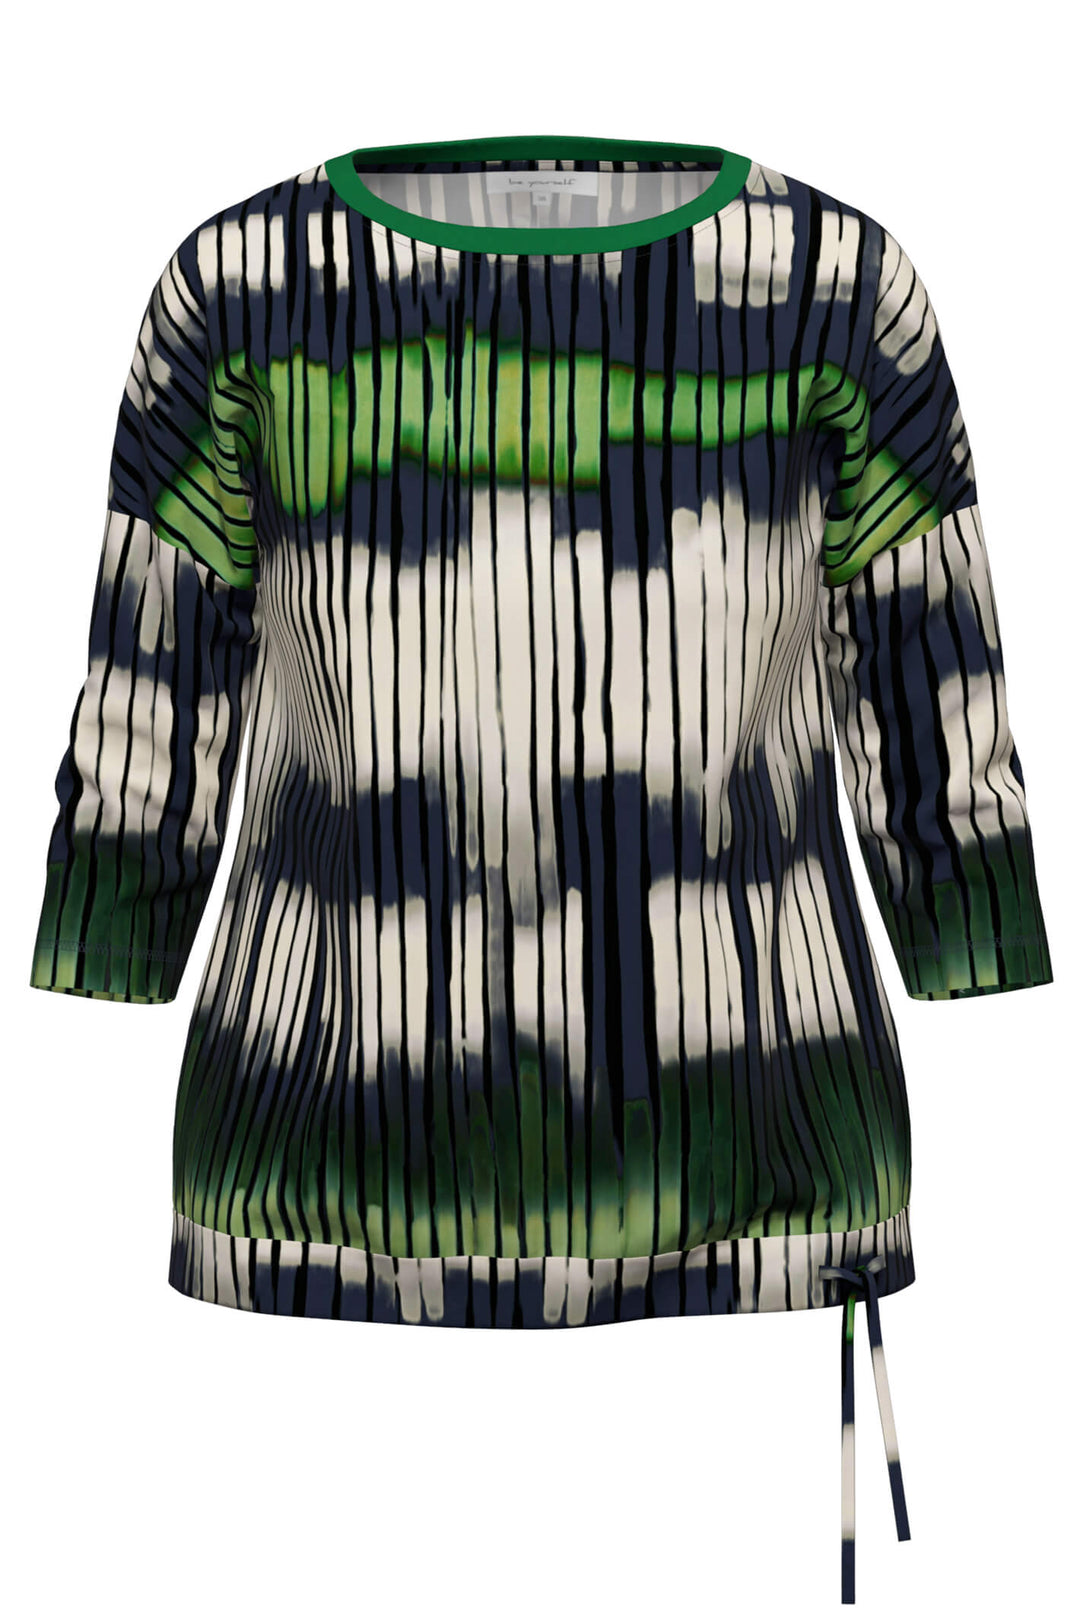 Erfo 751200600 7550 3/4 Sleeve Green Print Top - Shirley Allum Boutique